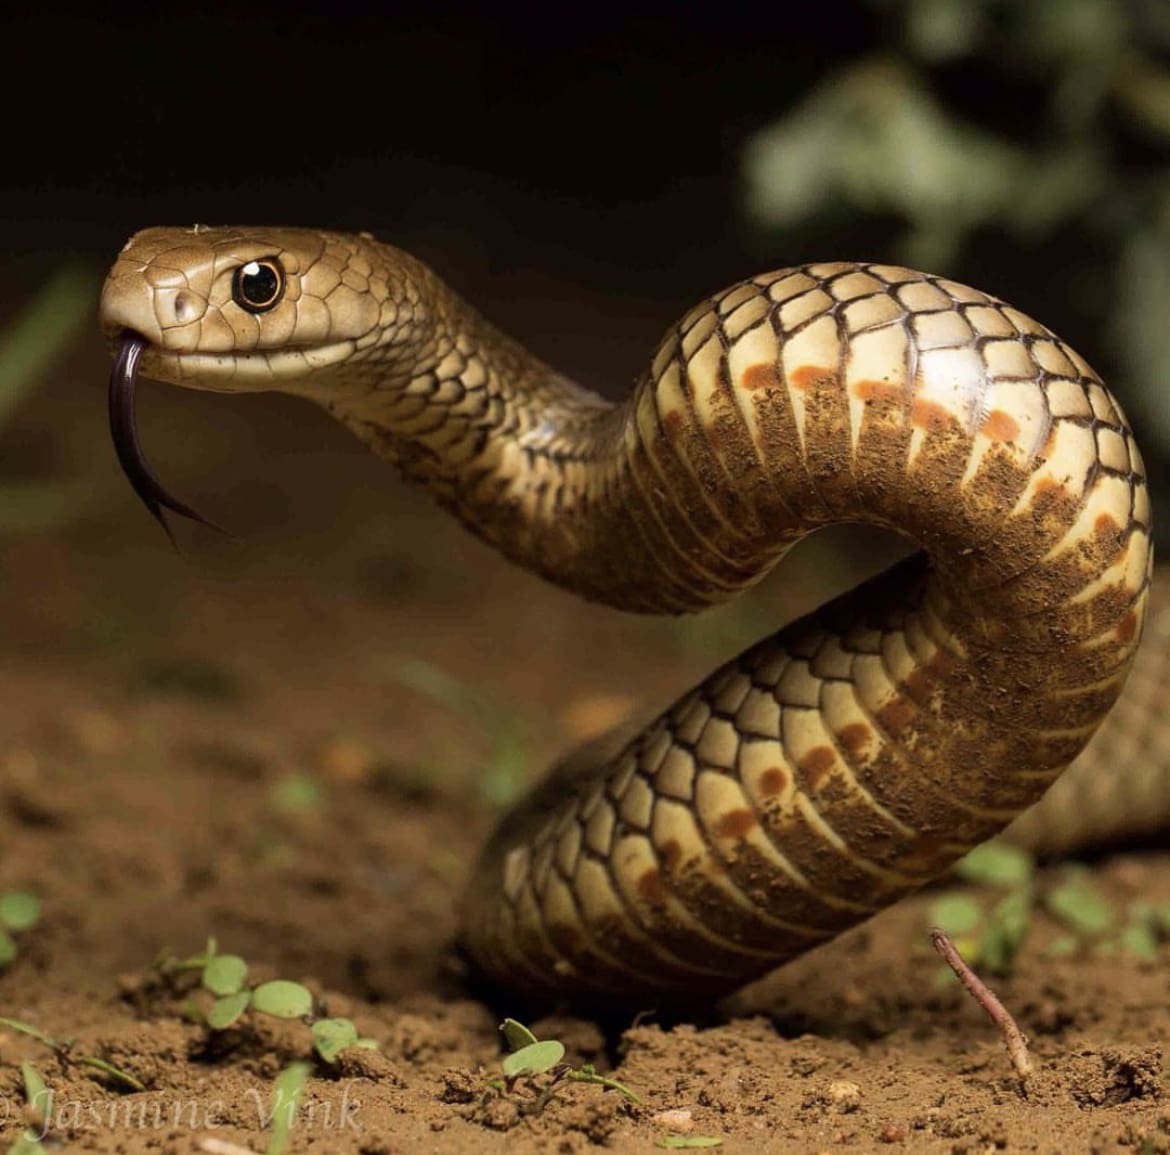 Eastern brown - one of the most venomous snakes in africa